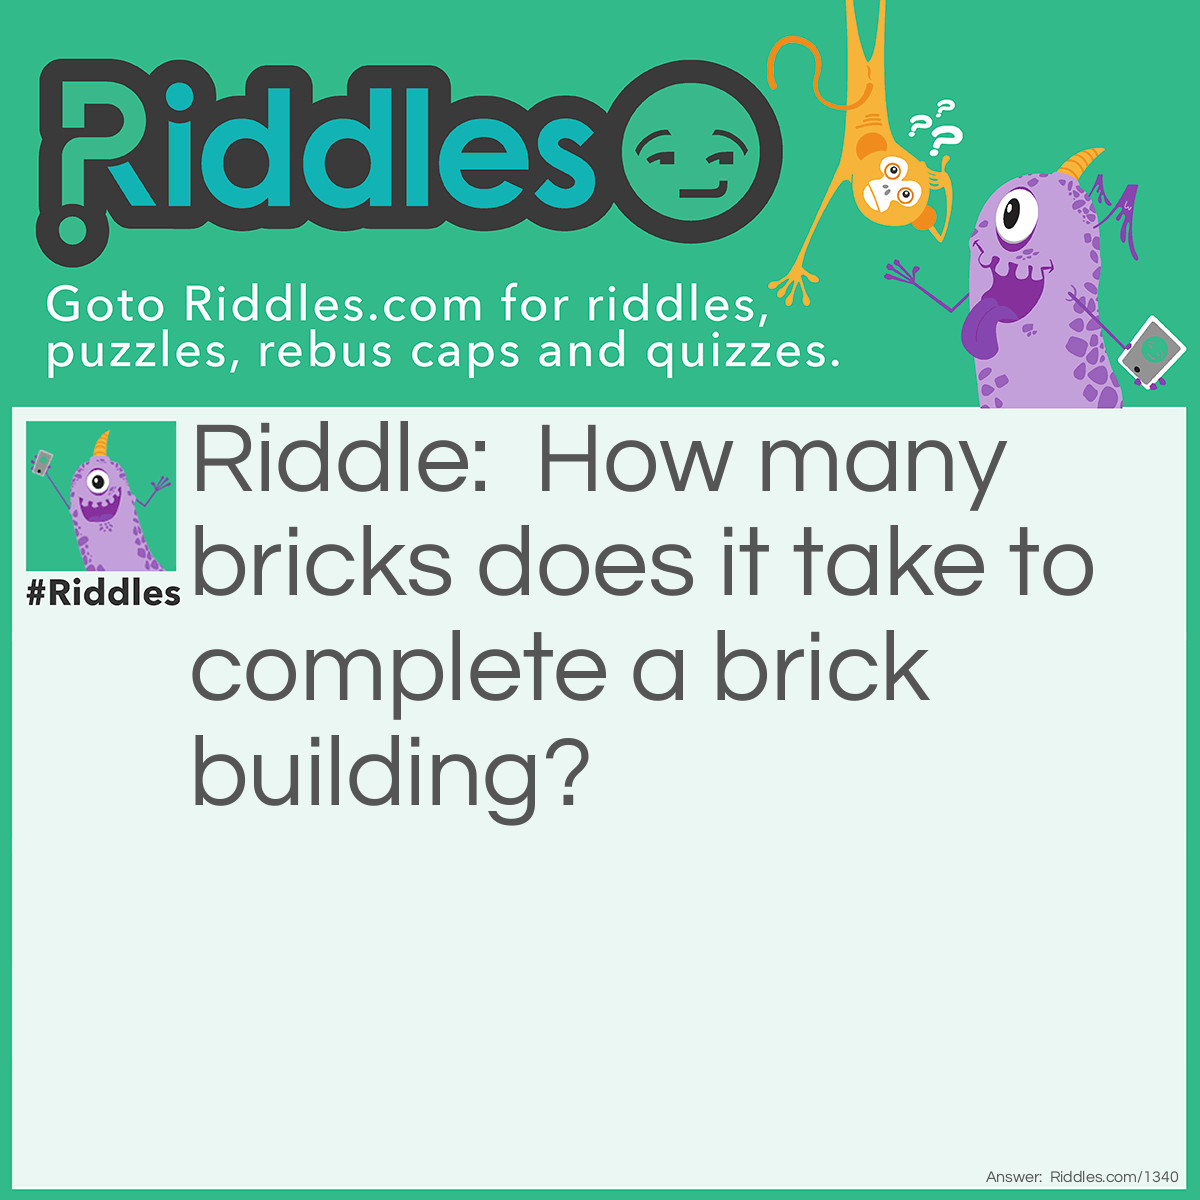 Riddle: How many bricks does it take to complete a brick building? Answer: One brick.